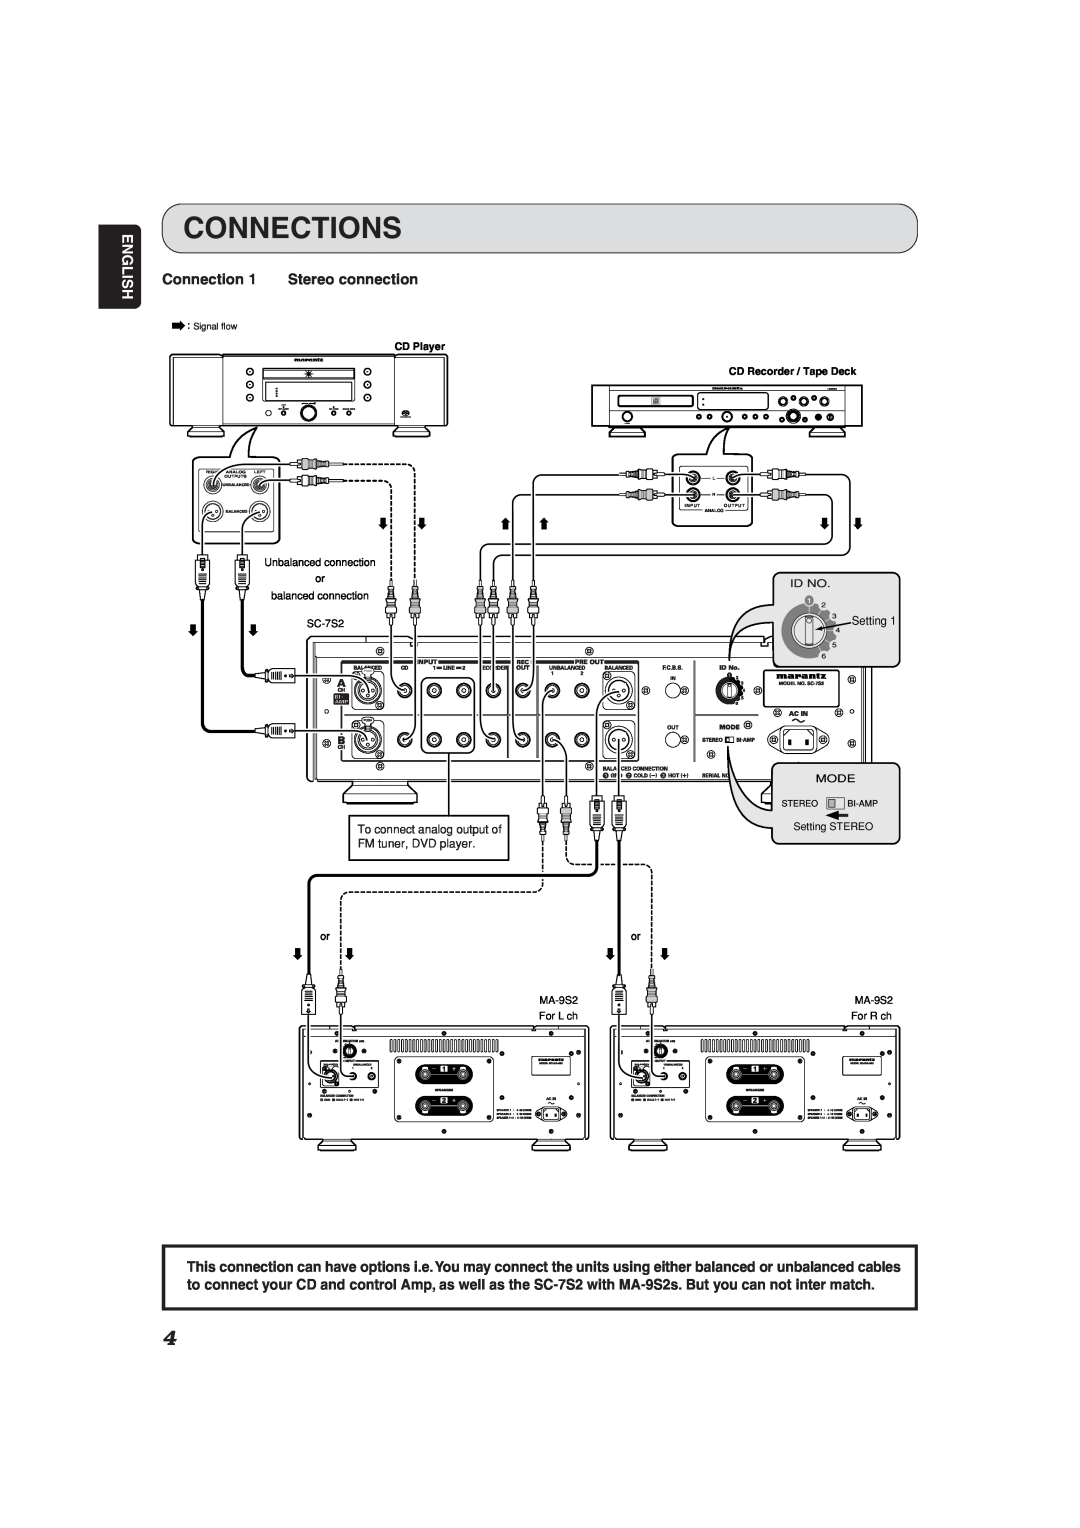 Marantz SC-7S2 manual Connections, English, Connection 1 Stereo connection 